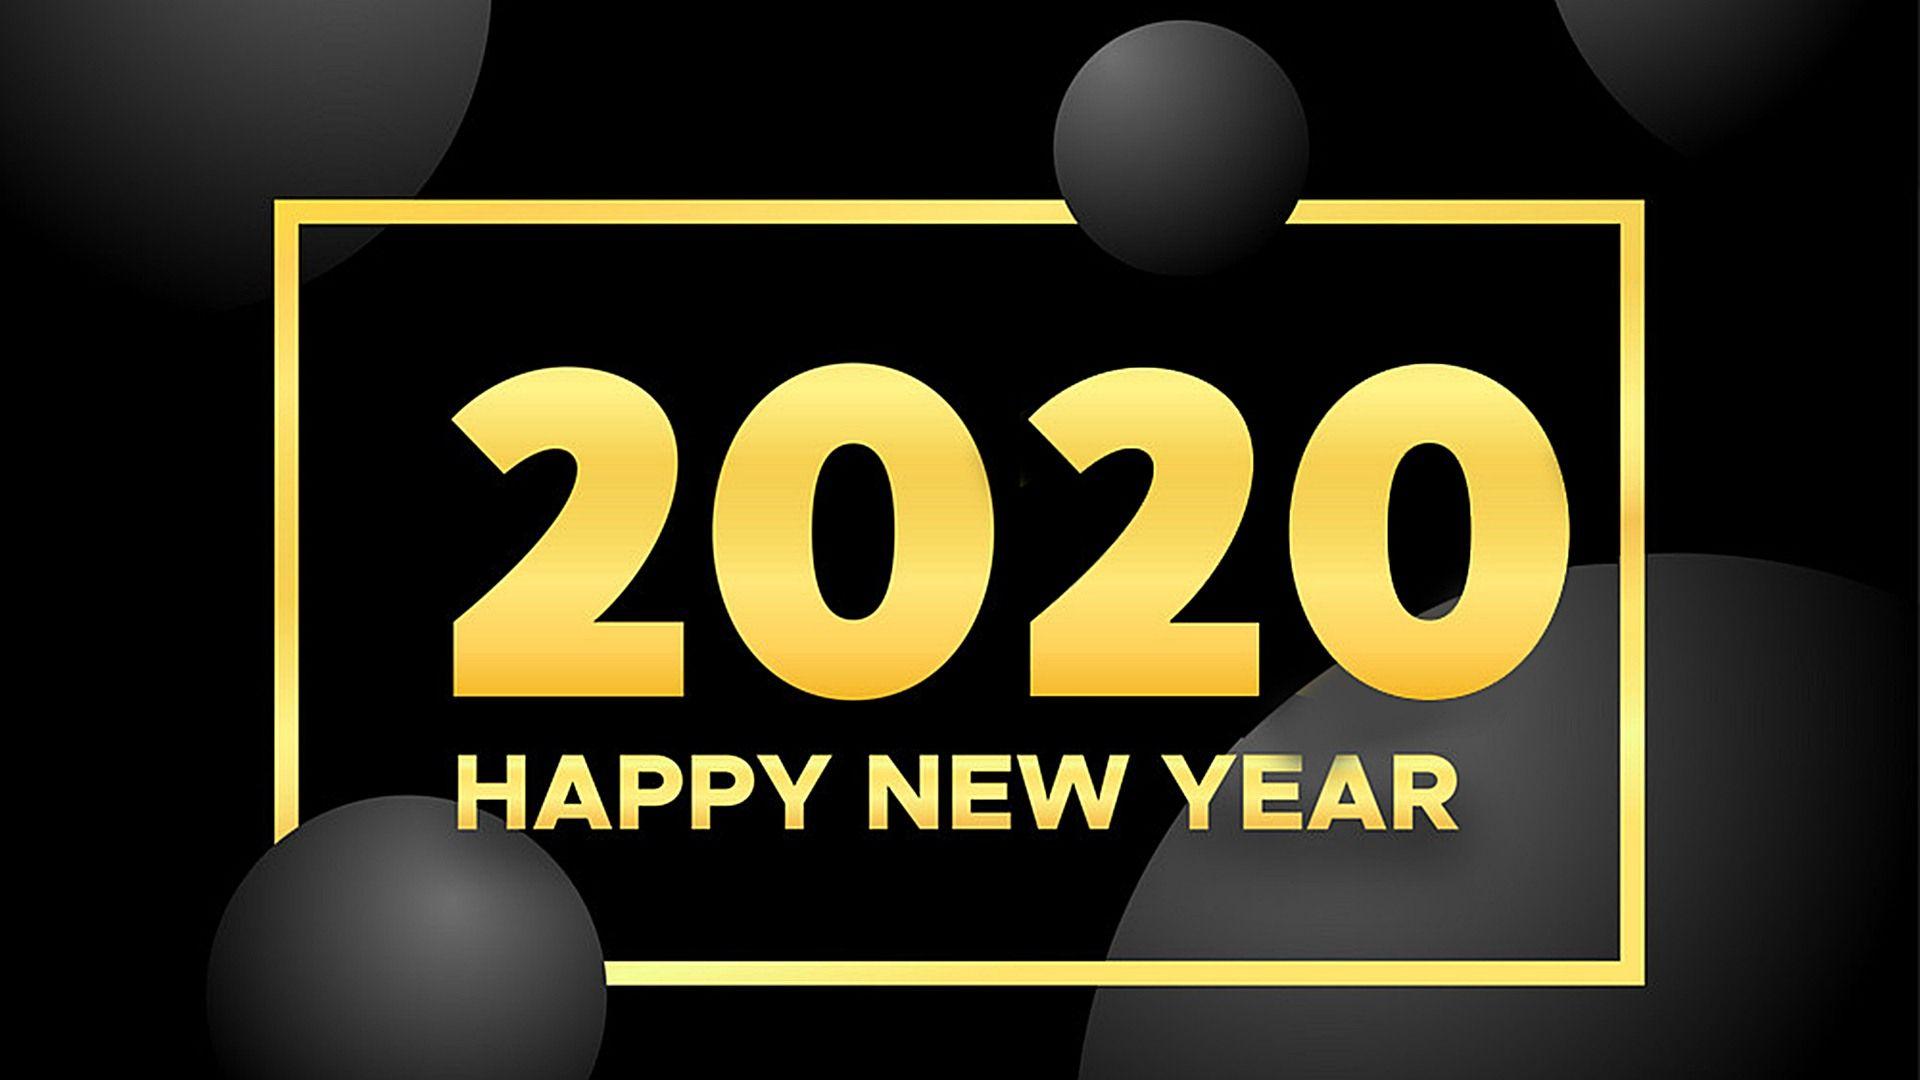 Download Happy New Year 2020 Wallpaper for iPhone